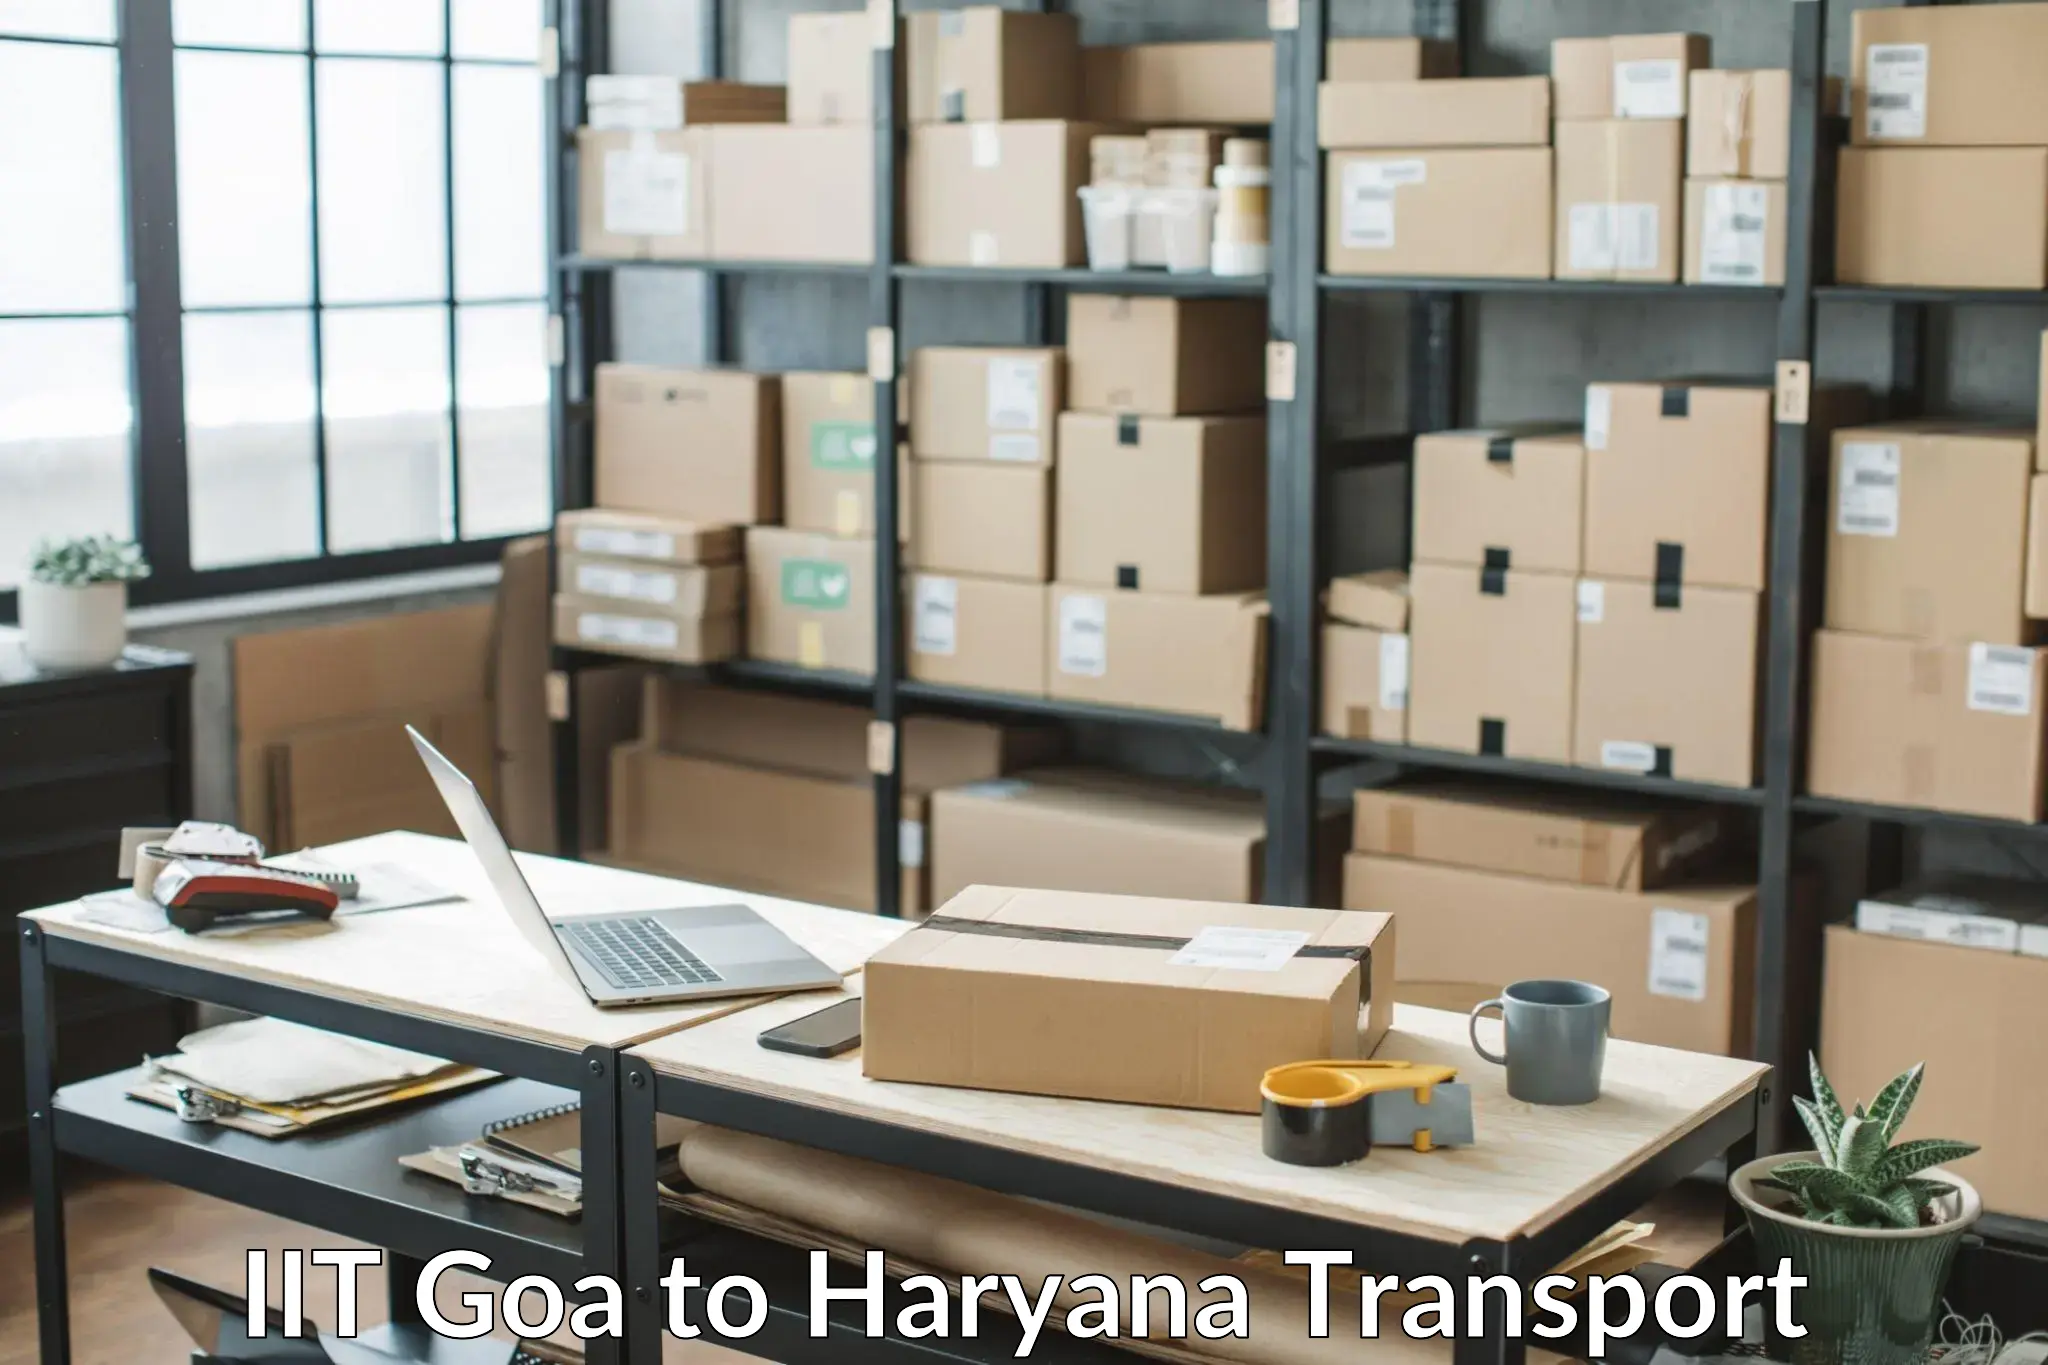 Goods delivery service IIT Goa to Panipat